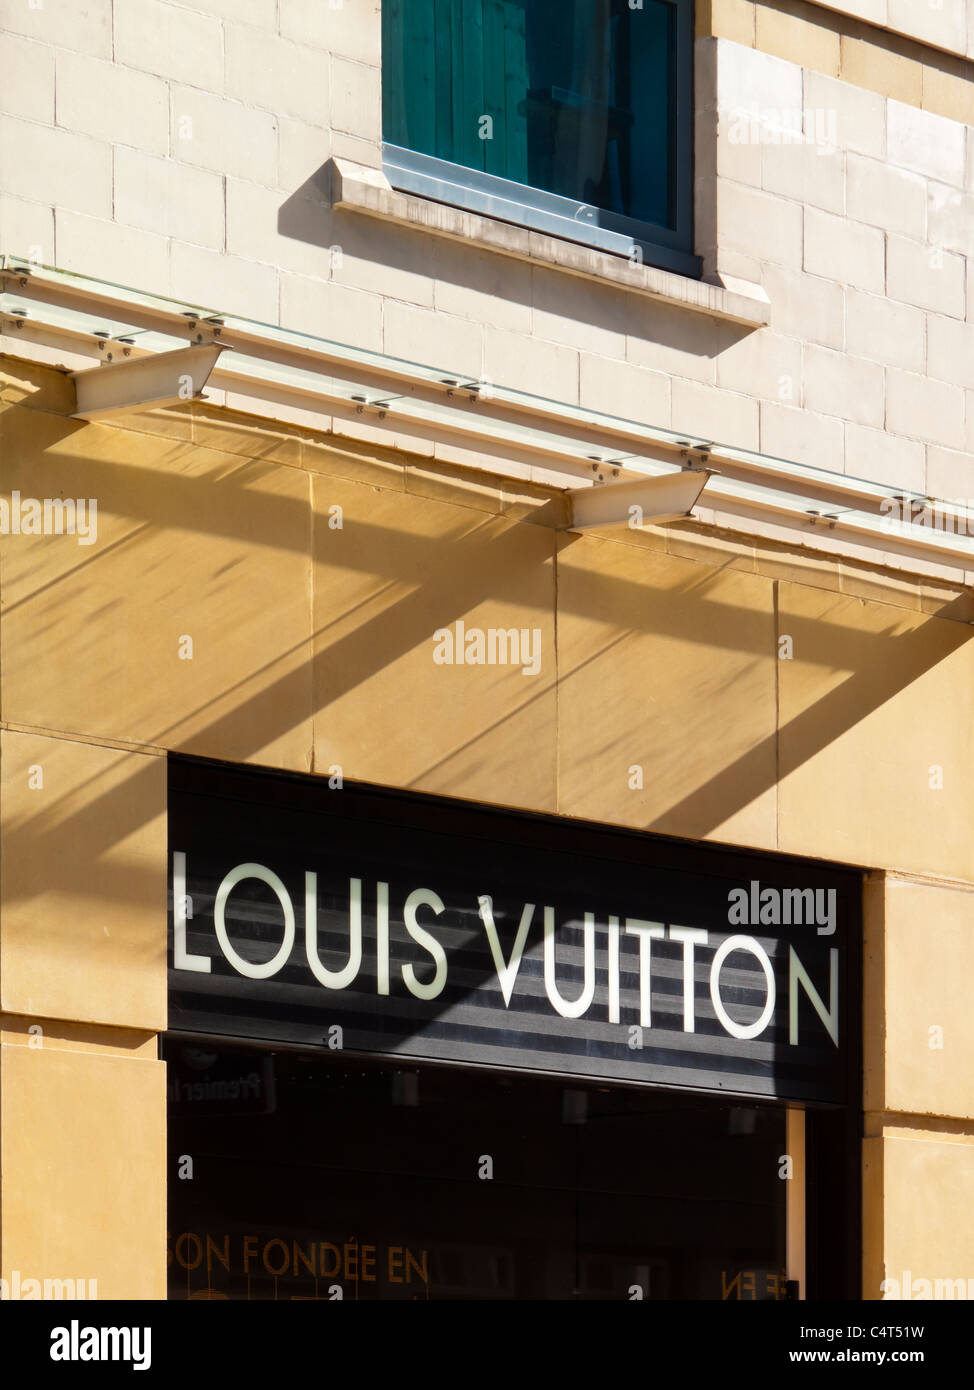 Louis Vuitton Store Sign In Berlin Germany Stock Photo - Download